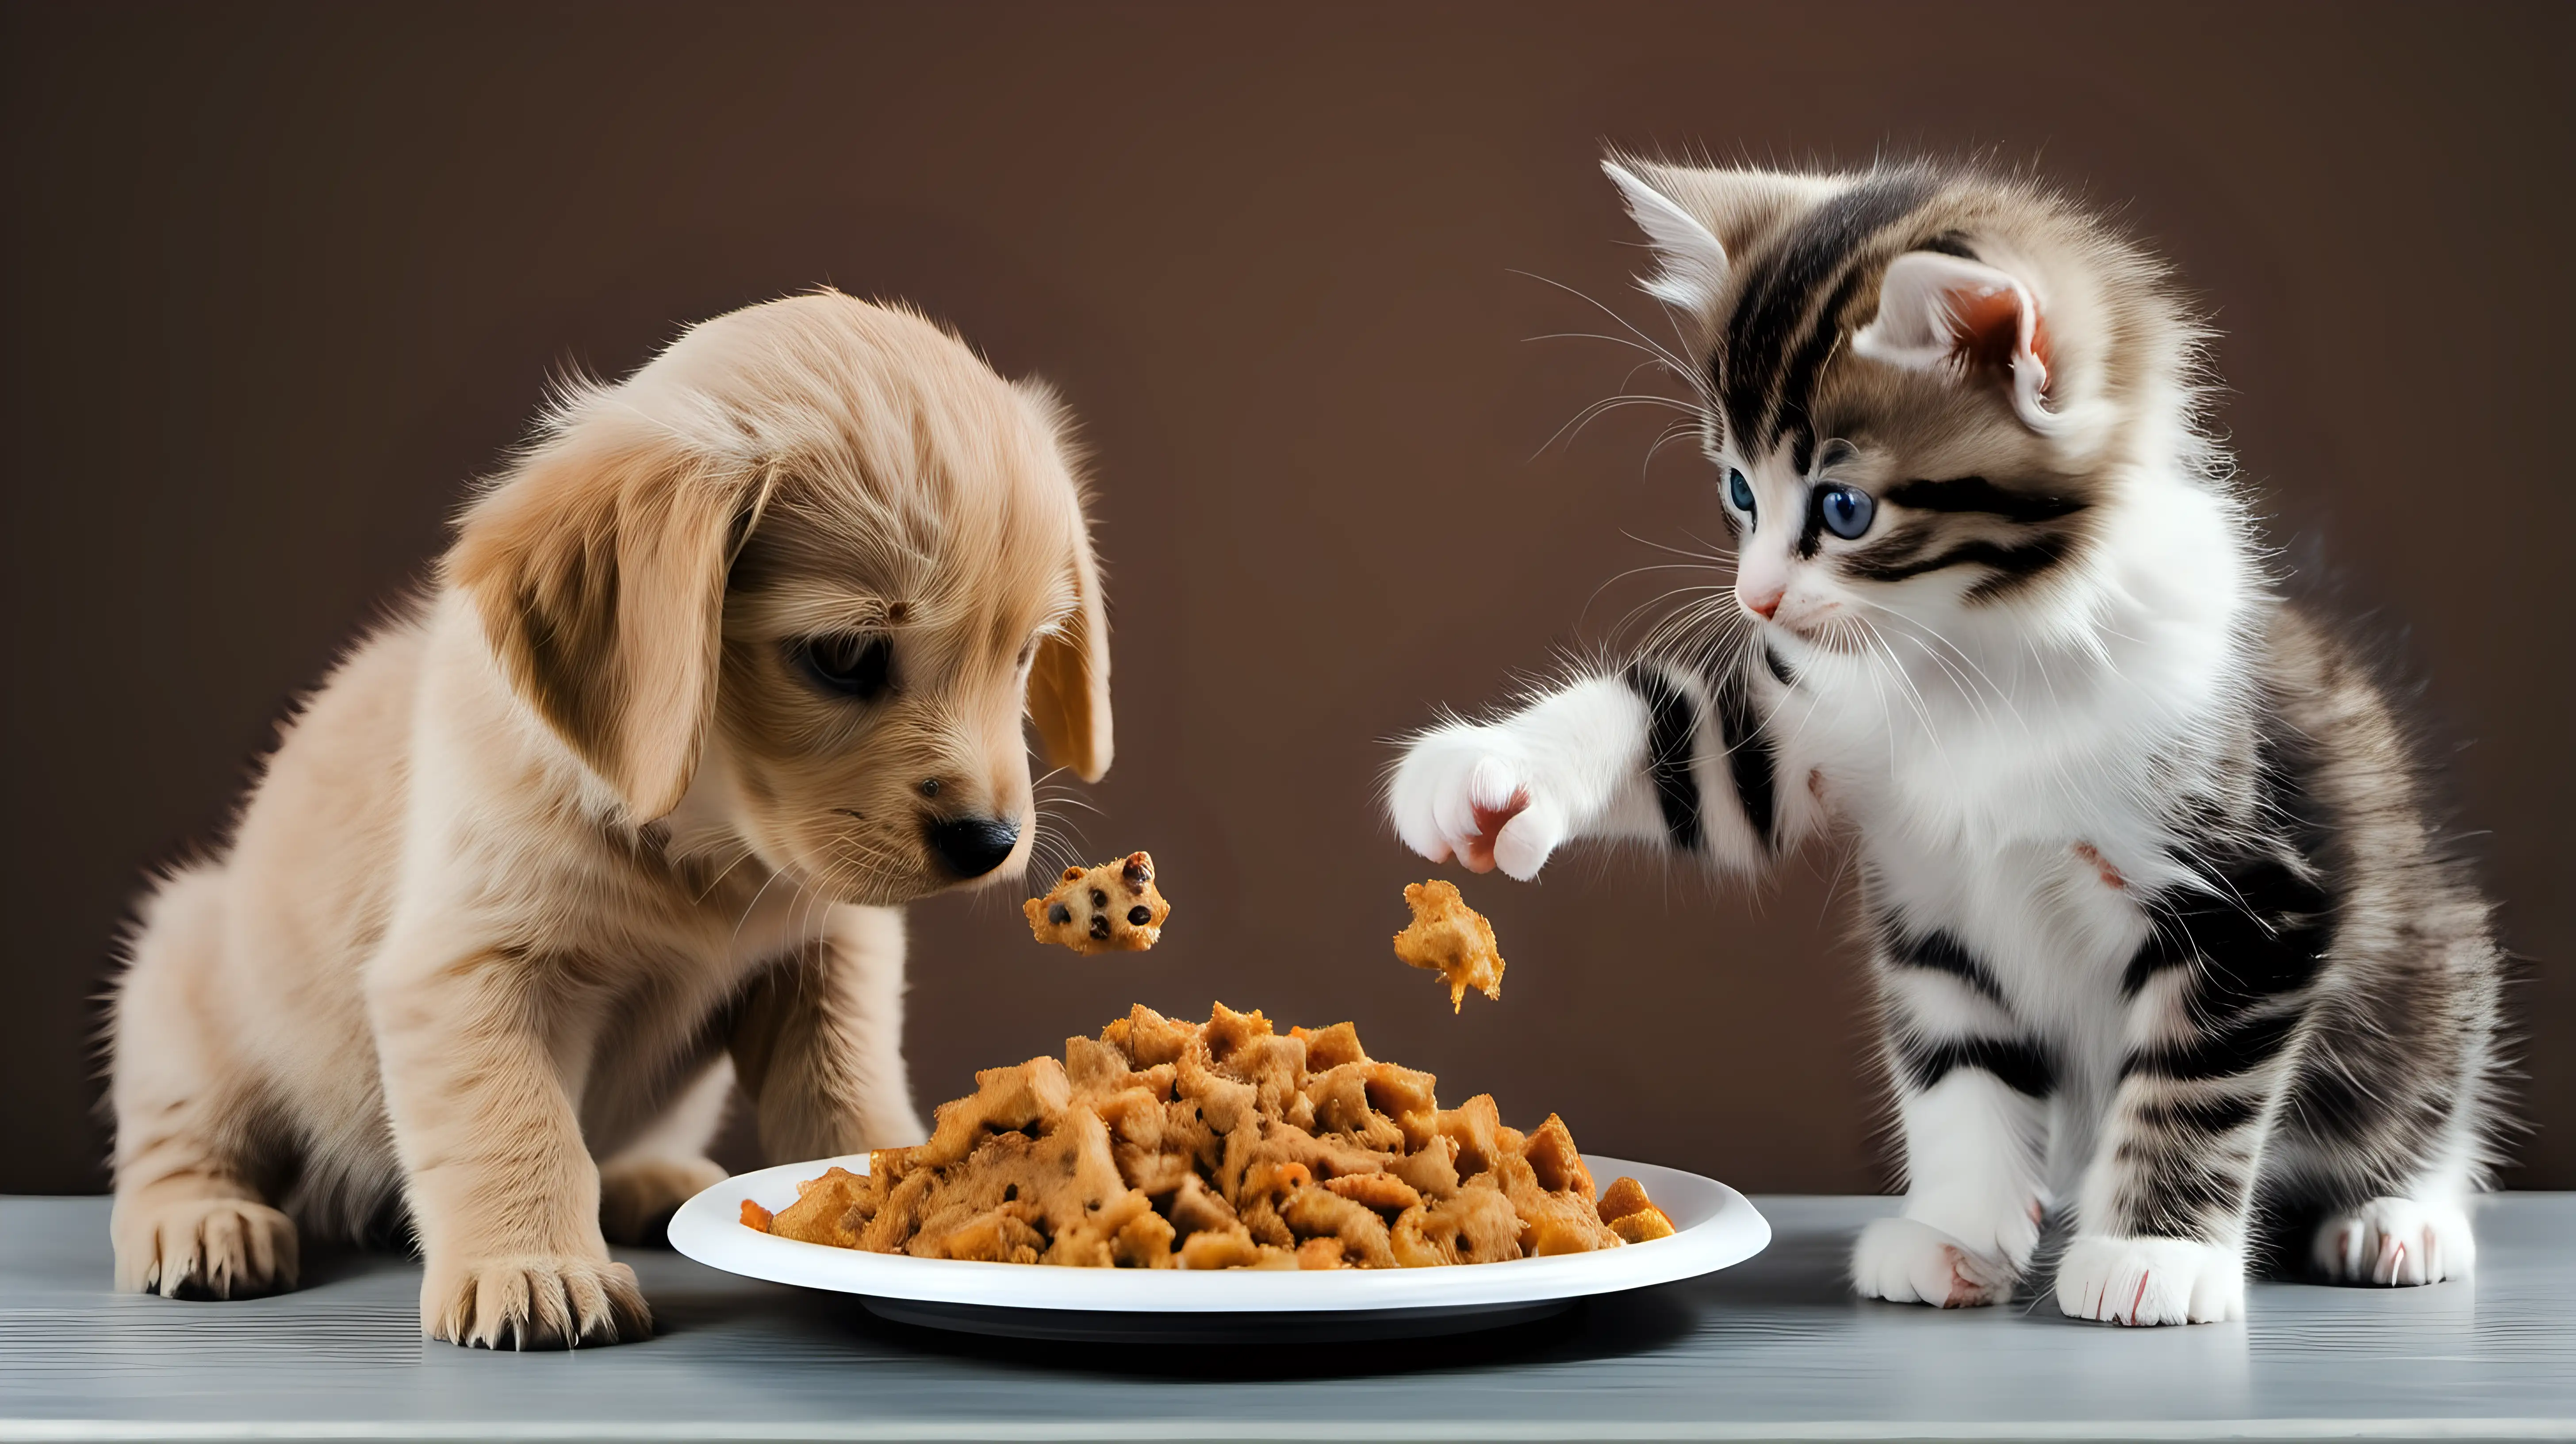 Adorable Puppy and Kitten Eating Together Cute Pets Enjoying a Meal